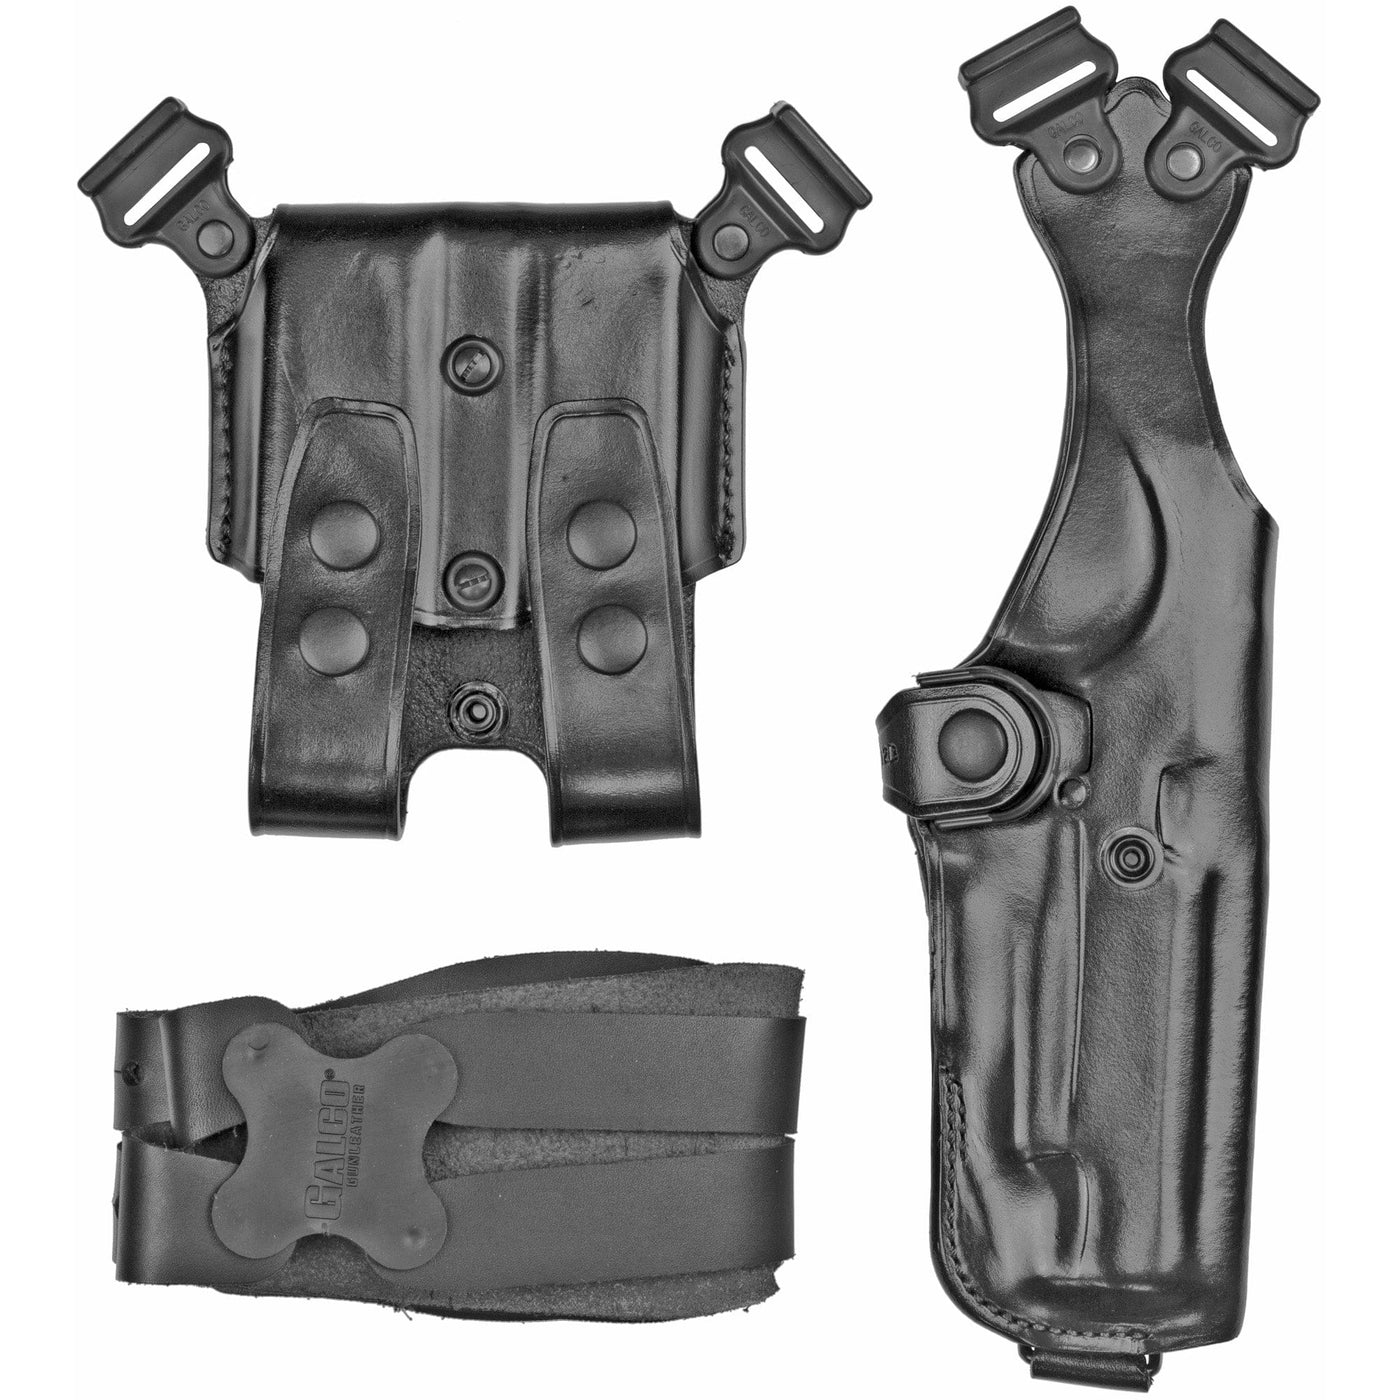 Galco Galco Vertical Shoulder System - 4.0 Ambi Leather 1911 5" Black Black Holsters And Related Items